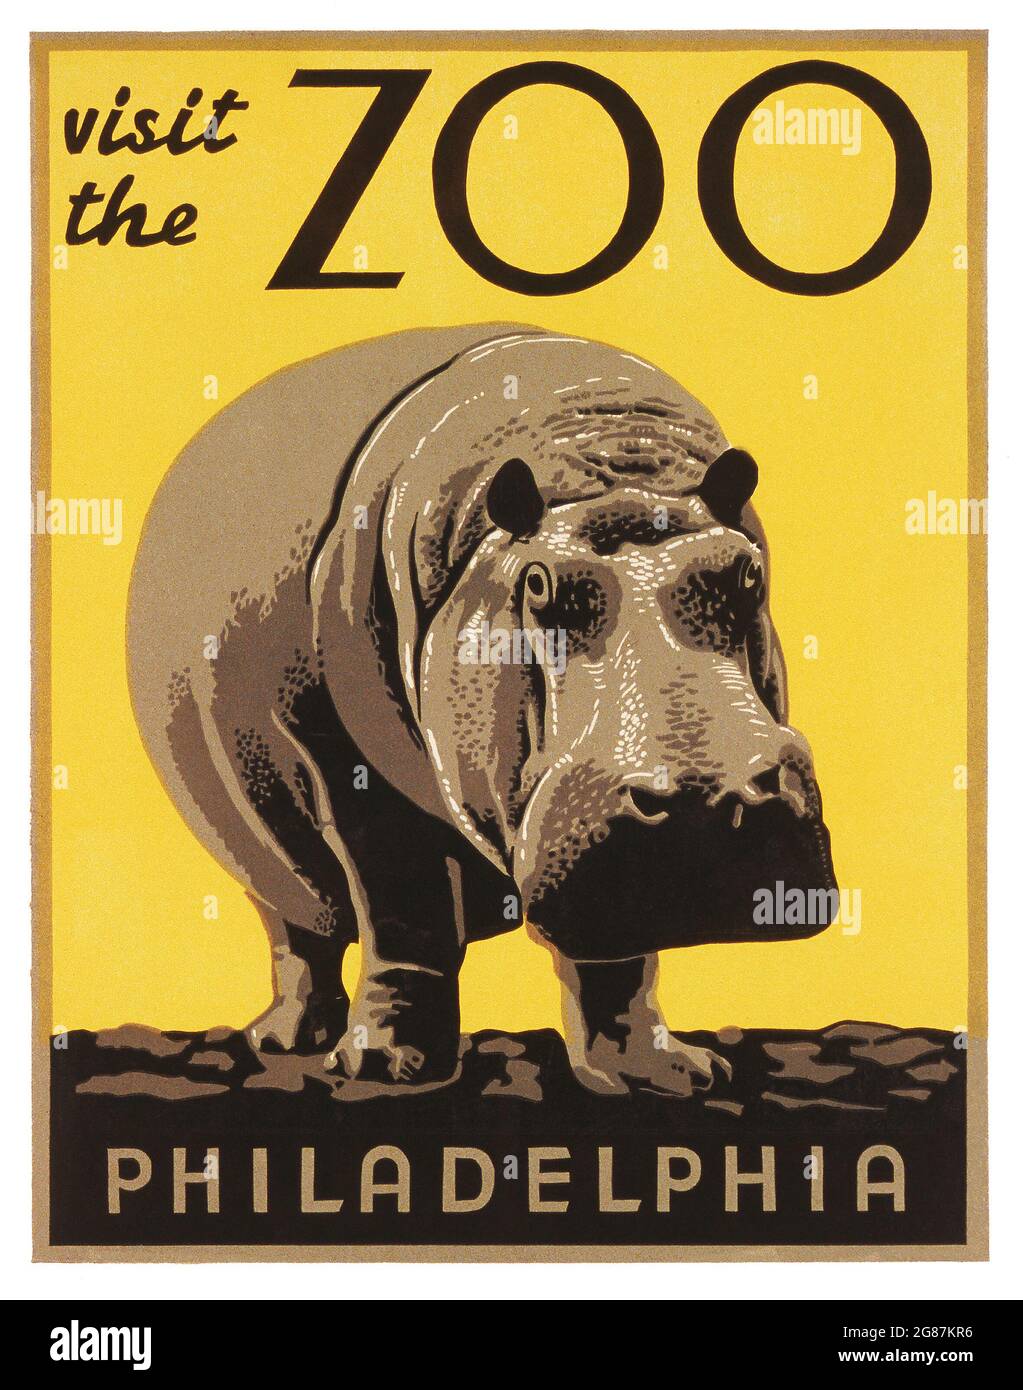 Poster encouraging visitors to come and visit the Philadelphia Zoo (Pennsylvania, USA), “Visit the Zoo” with a hippopotamus as an iconic animal. 1936. Stock Photo